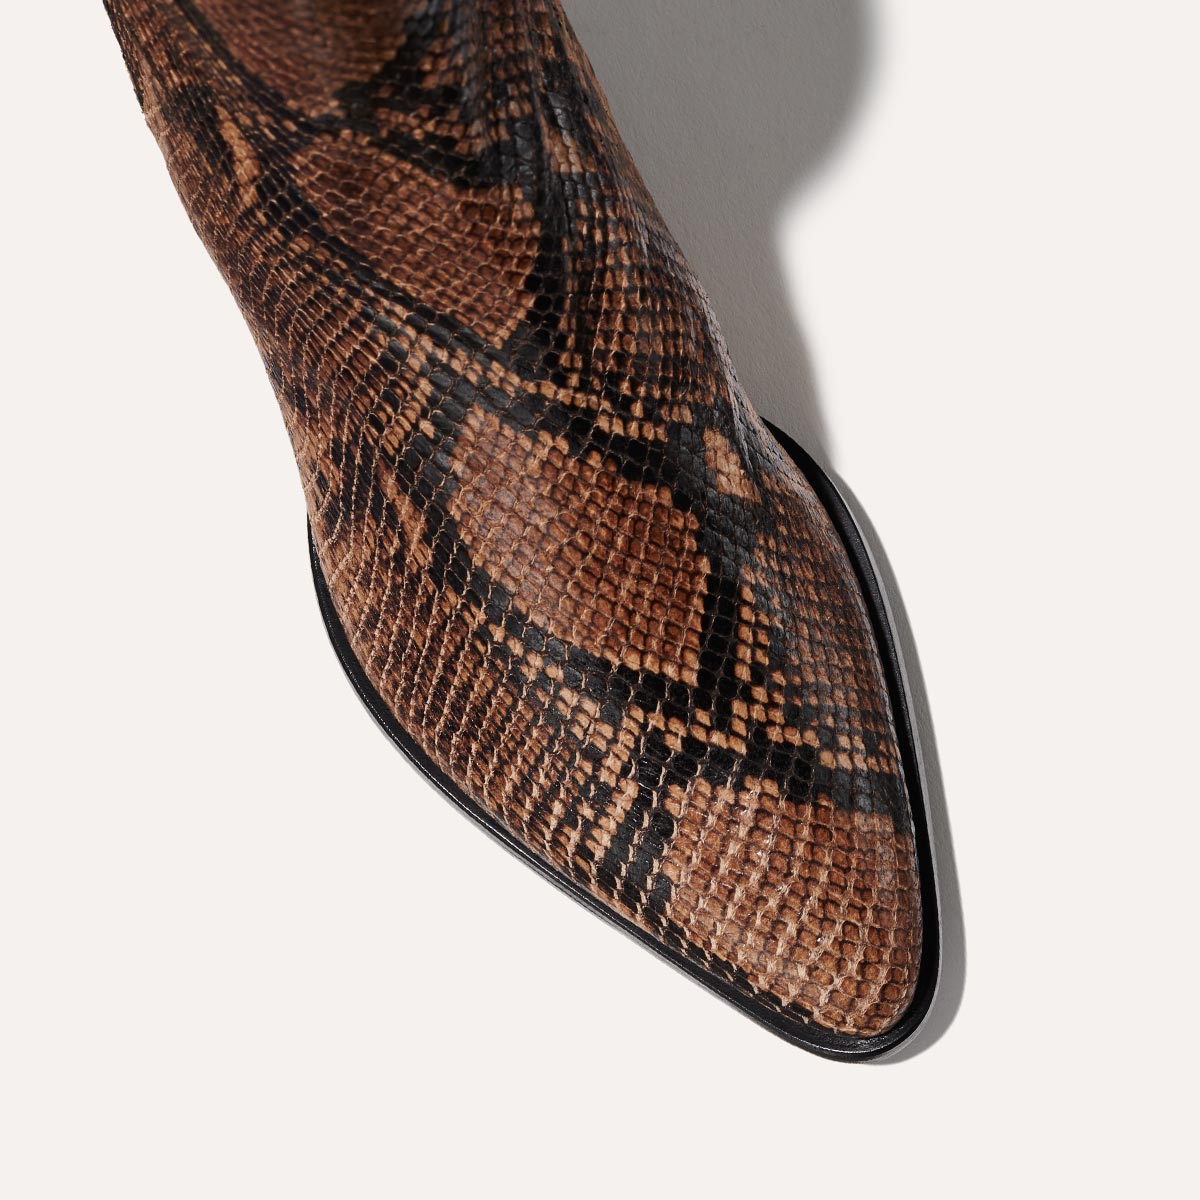 The Downtown Boot - Espresso Python Embossed